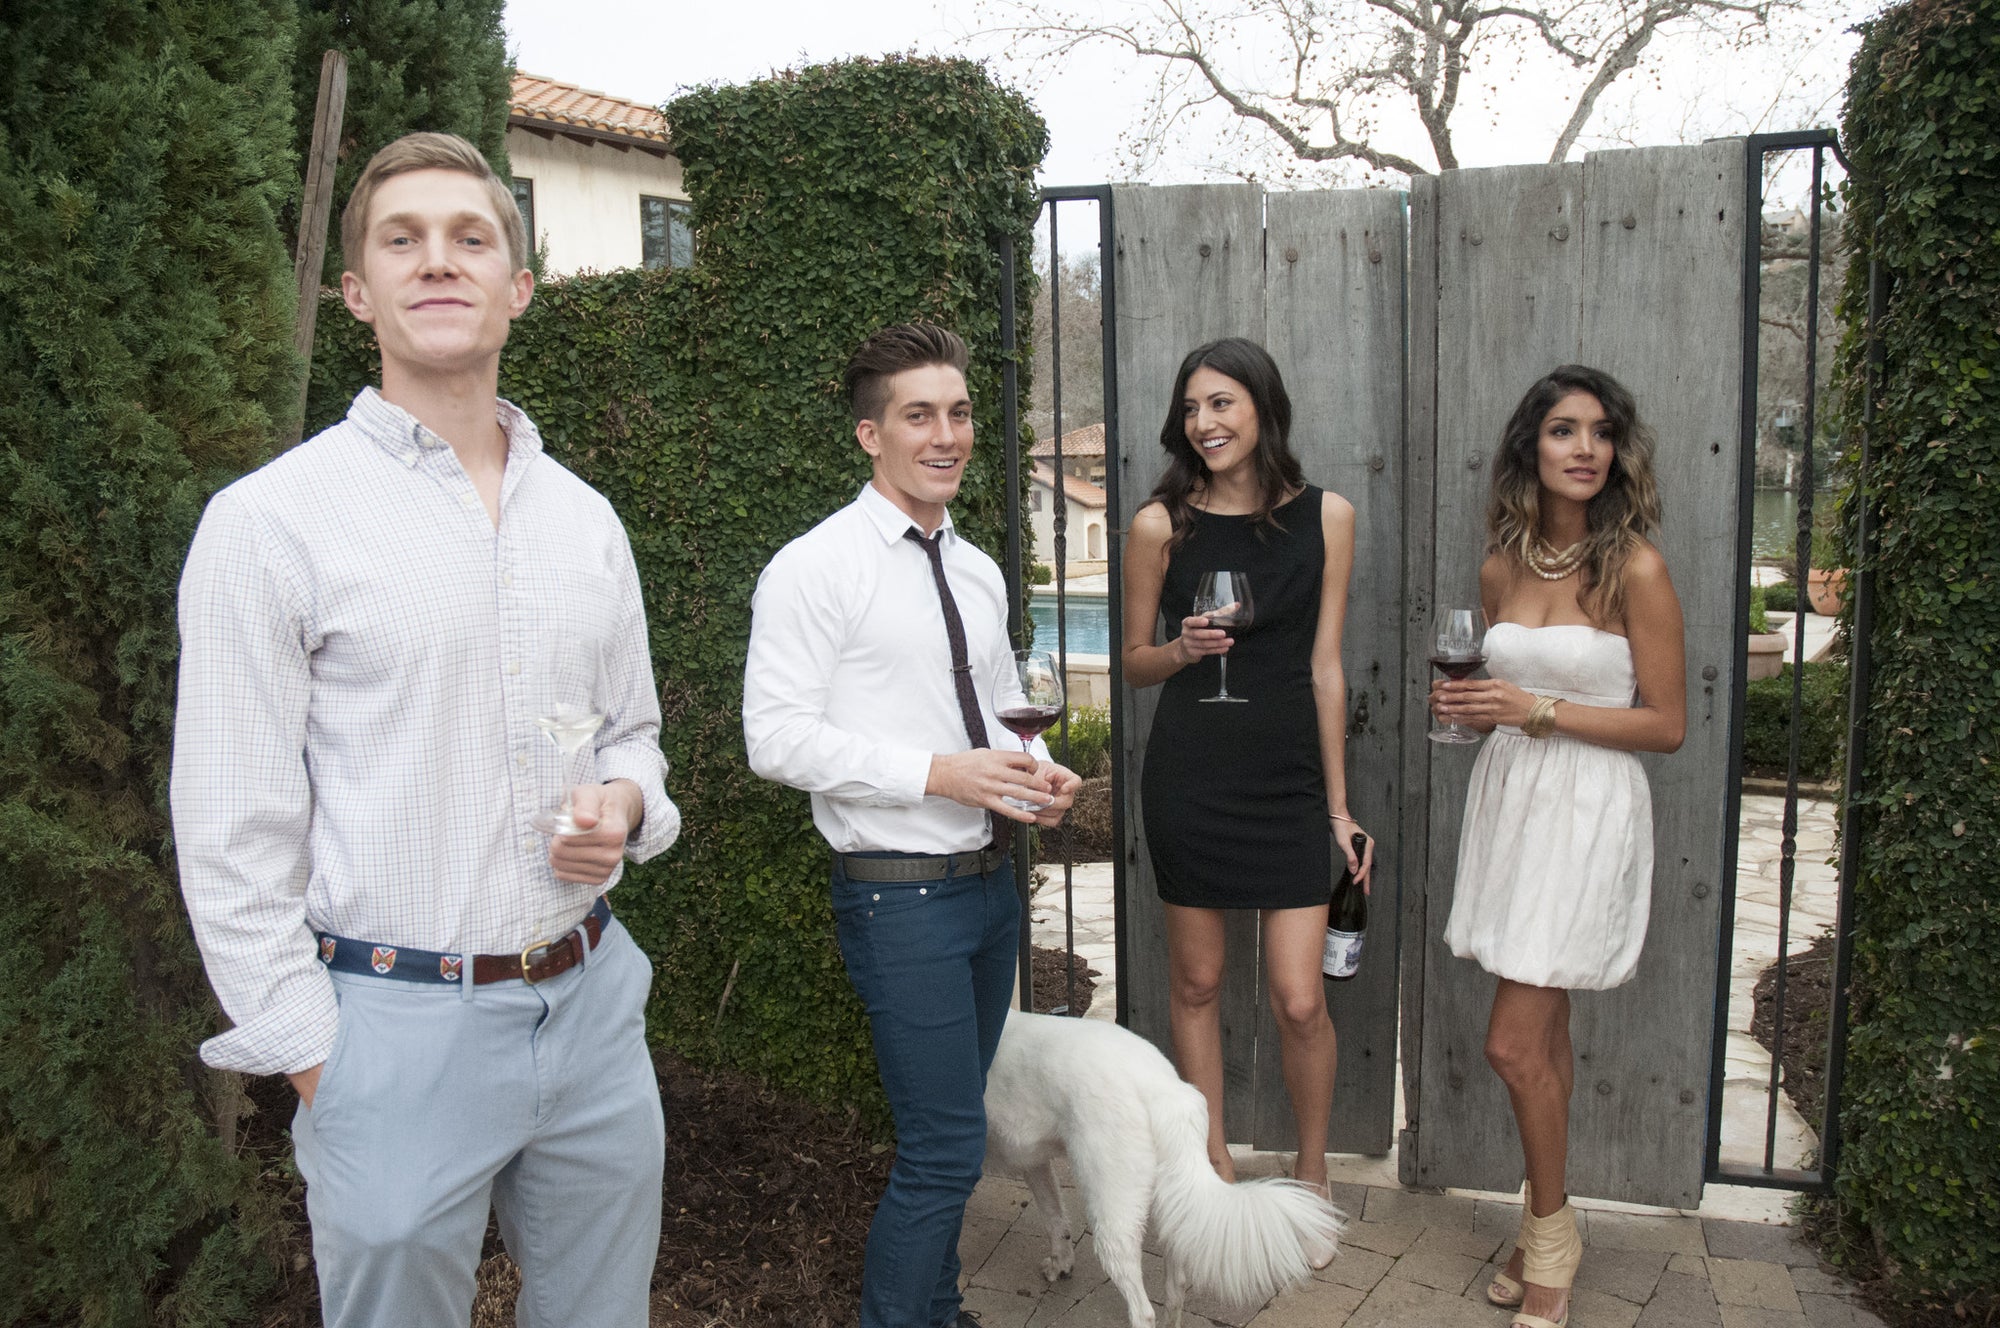 Hip young Austin entrepreneurs filter snobbery out of winemaking